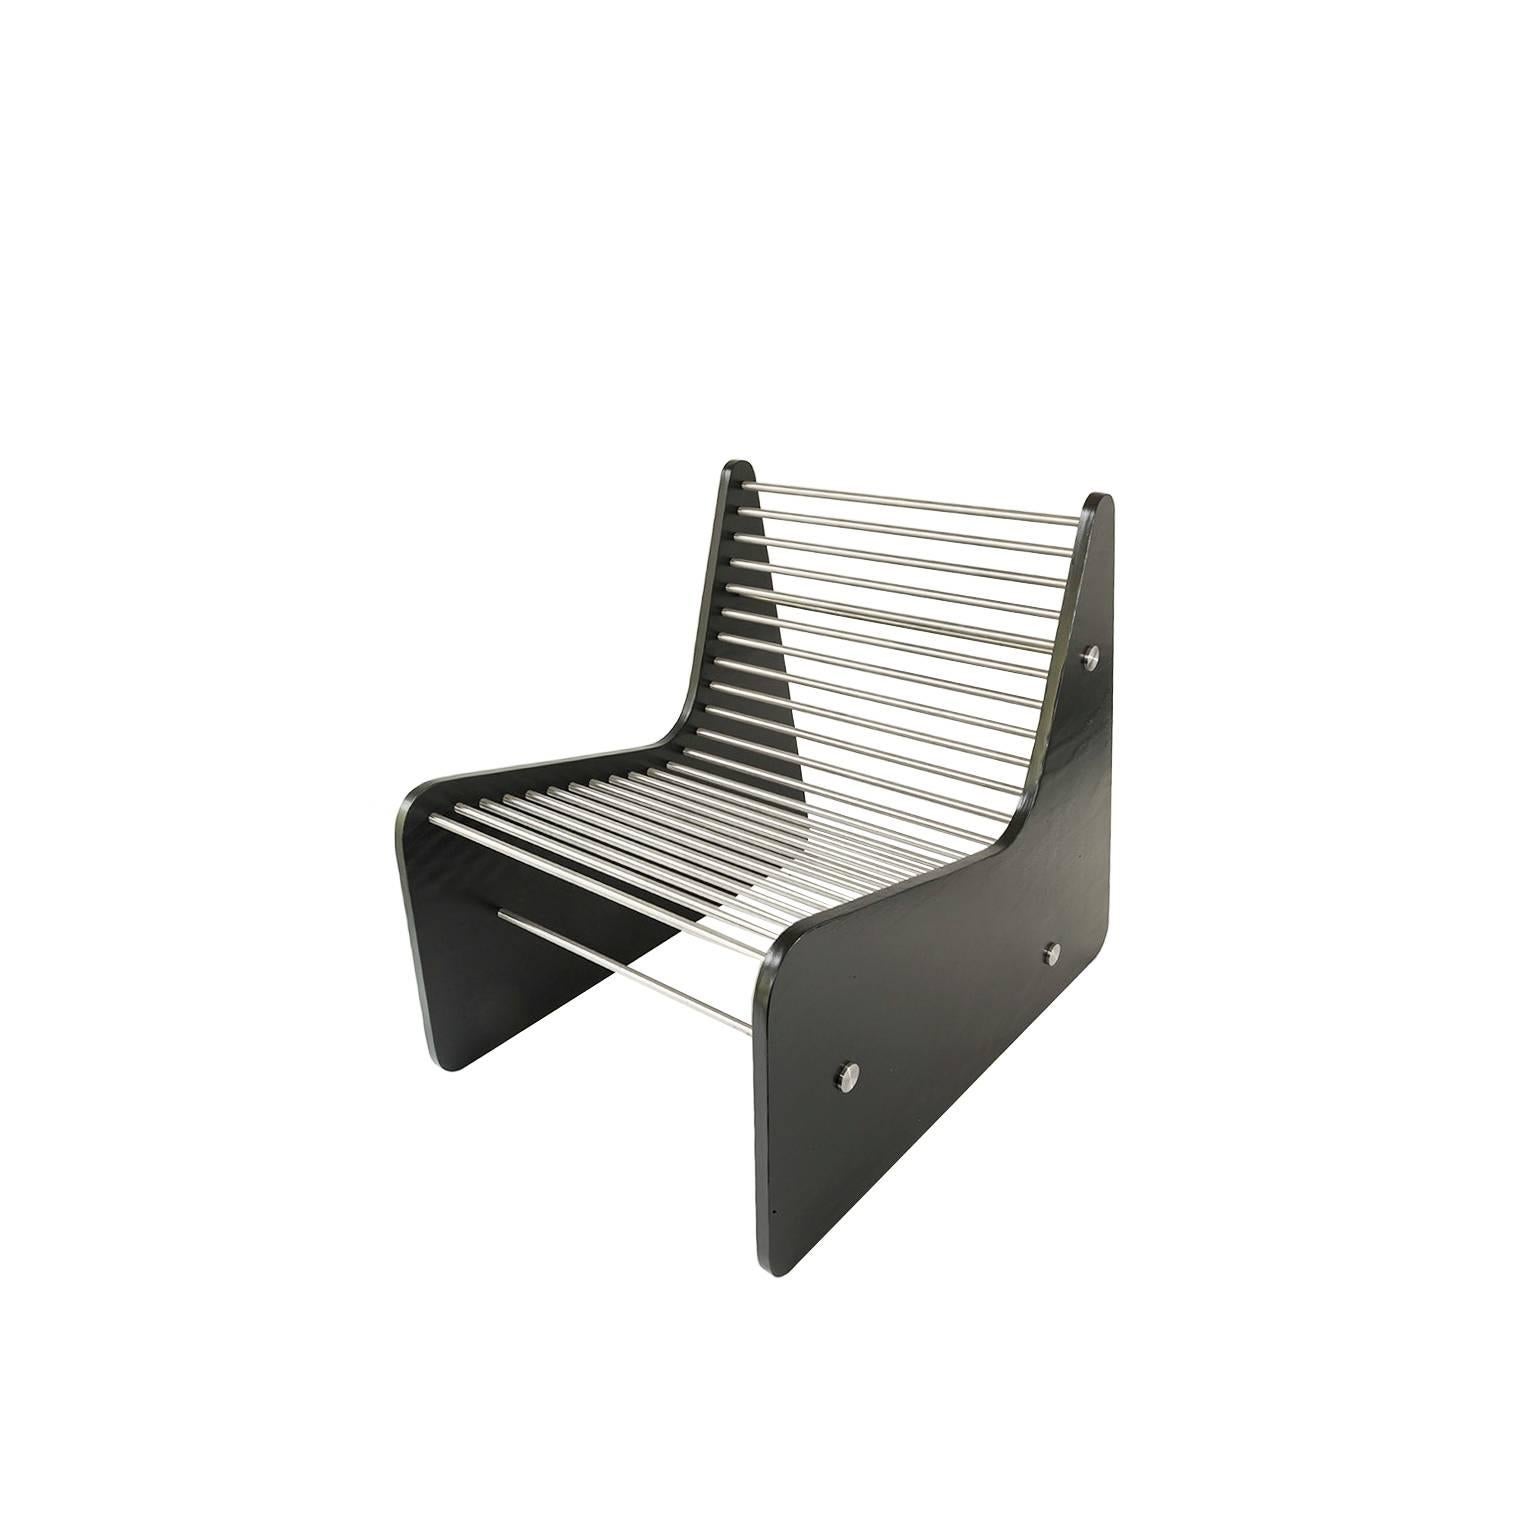 Mountain Chair by Michael Boyd for PLANEfurniture

PLANEfurniture emerges out of the idea that form should inspire; and these forms should function effortlessly. How does one suspend a body in air? Minimalism with character. Although there is